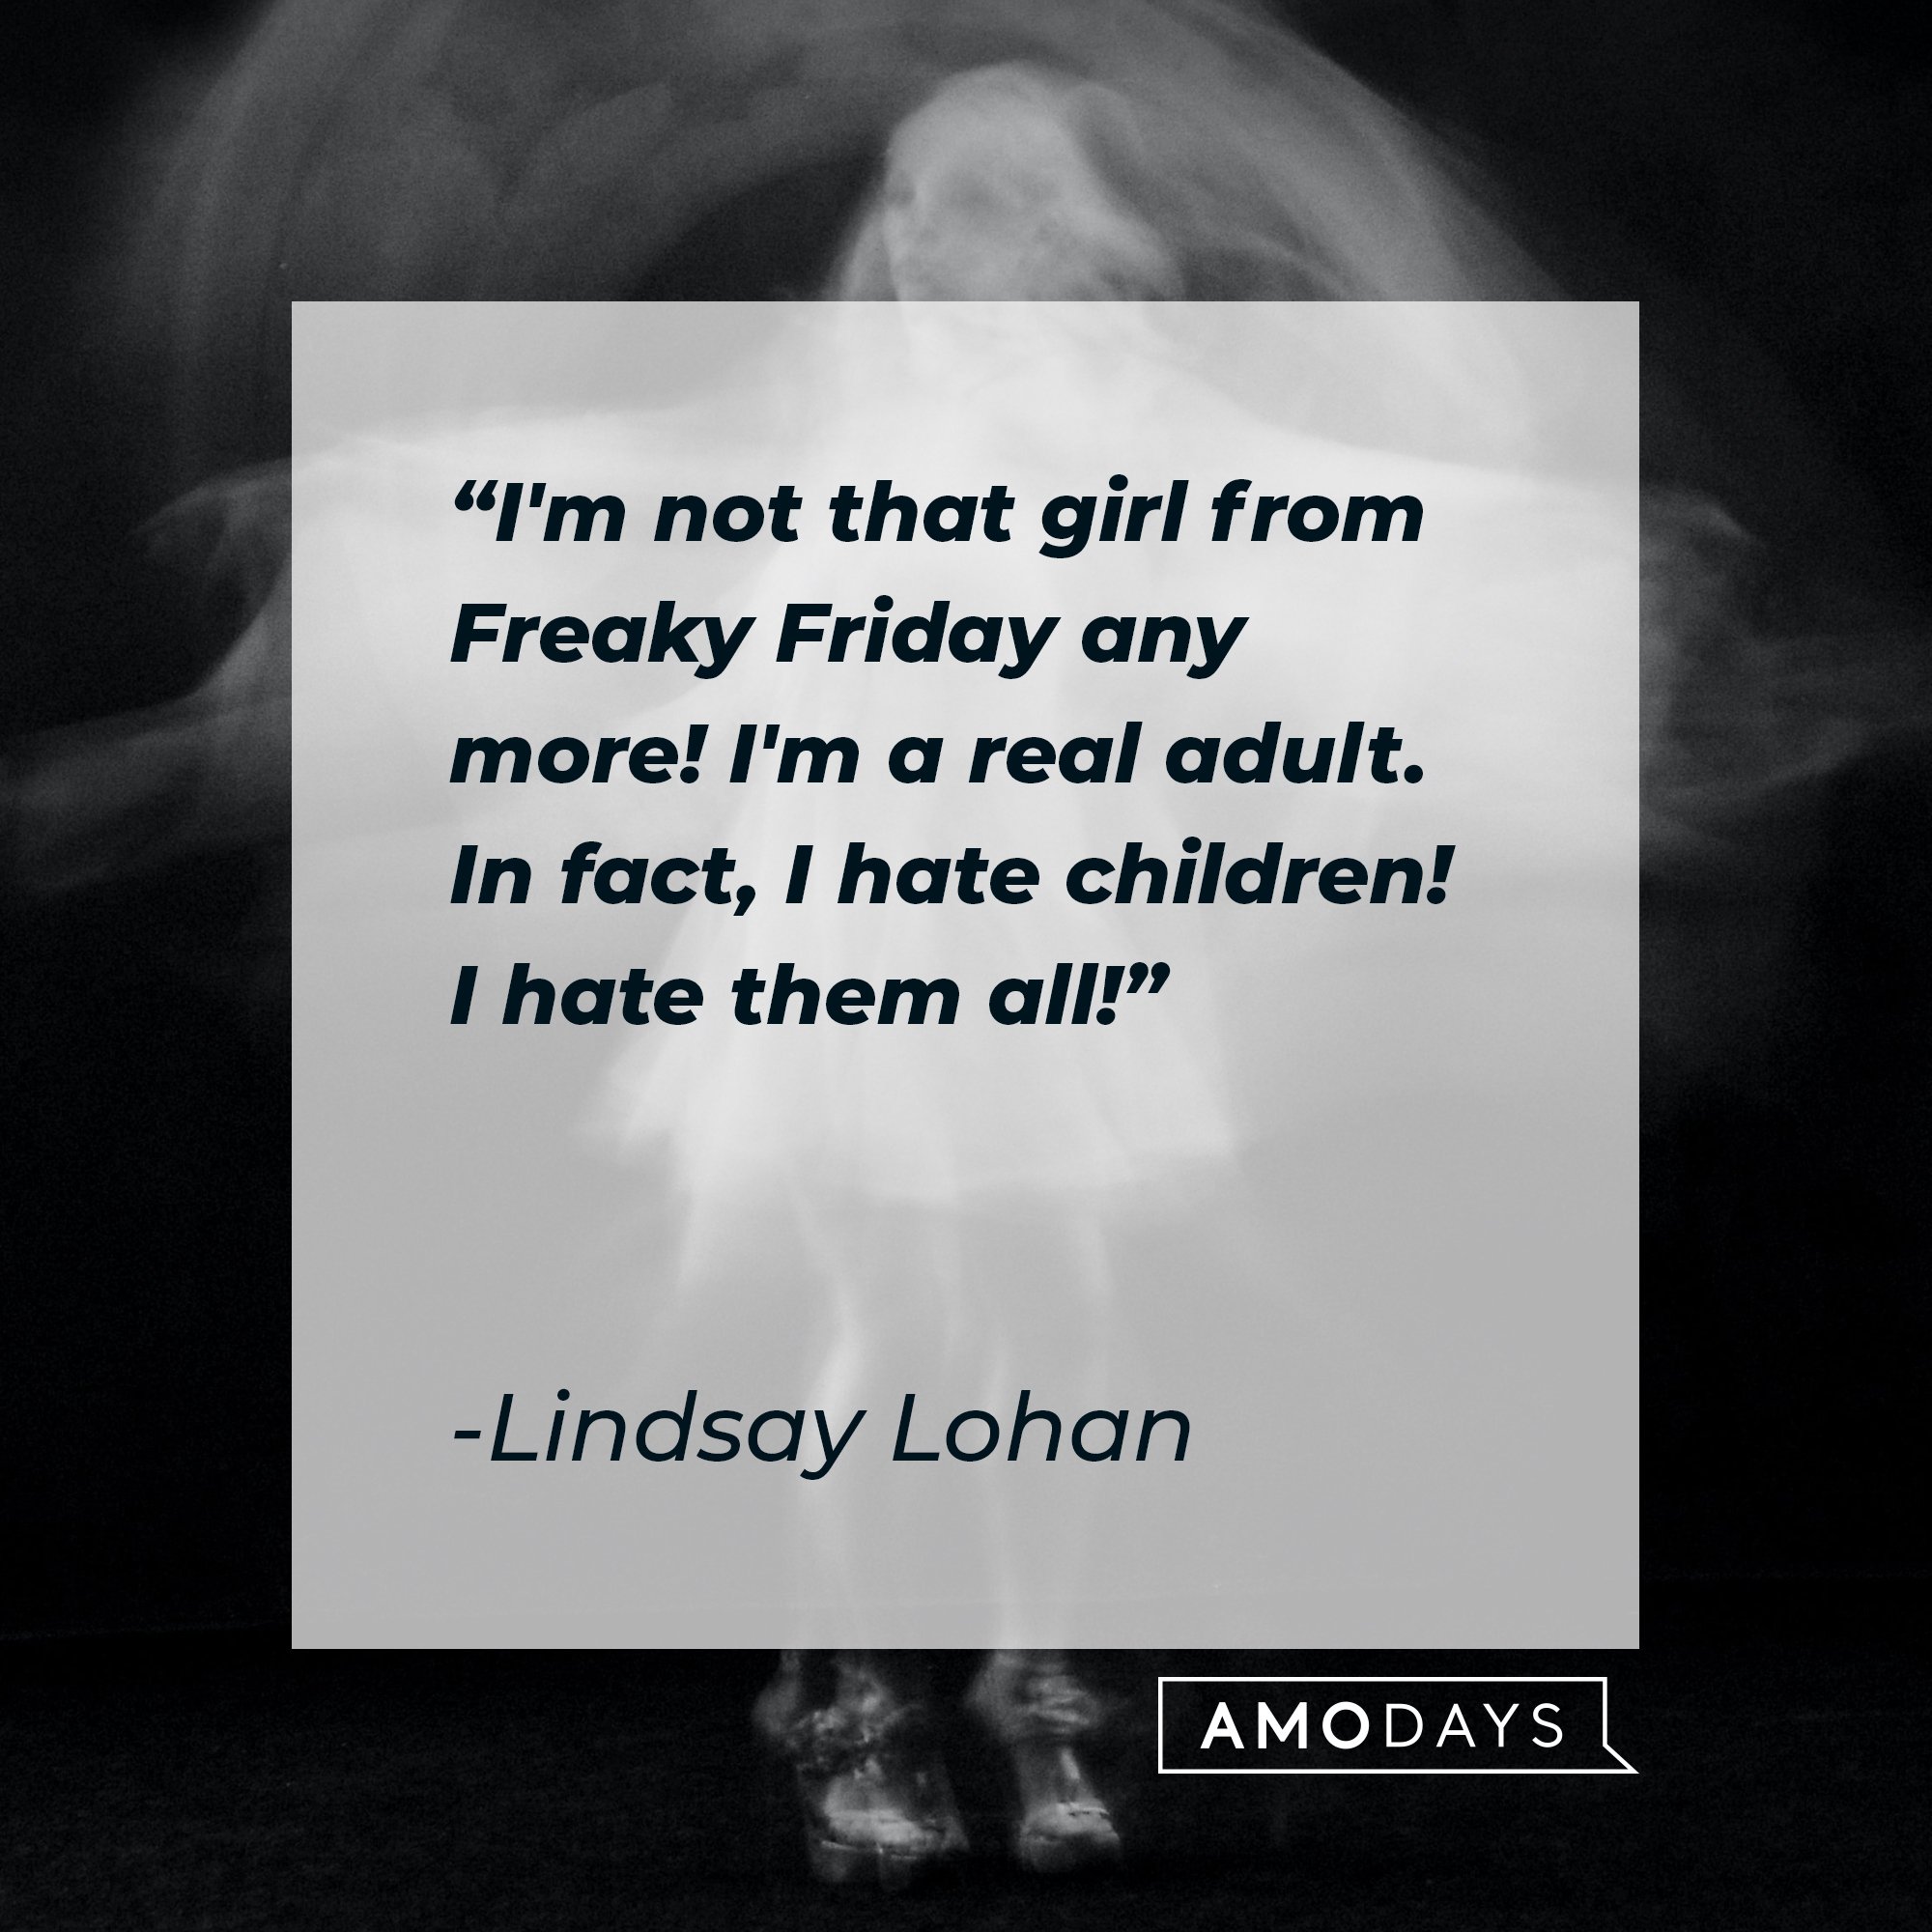 Lindsay Lohan’s quote: "I'm not that girl from Freaky Friday any more! I'm a real adult. In fact, I hate children! I hate them all!" | Image: AmoDays